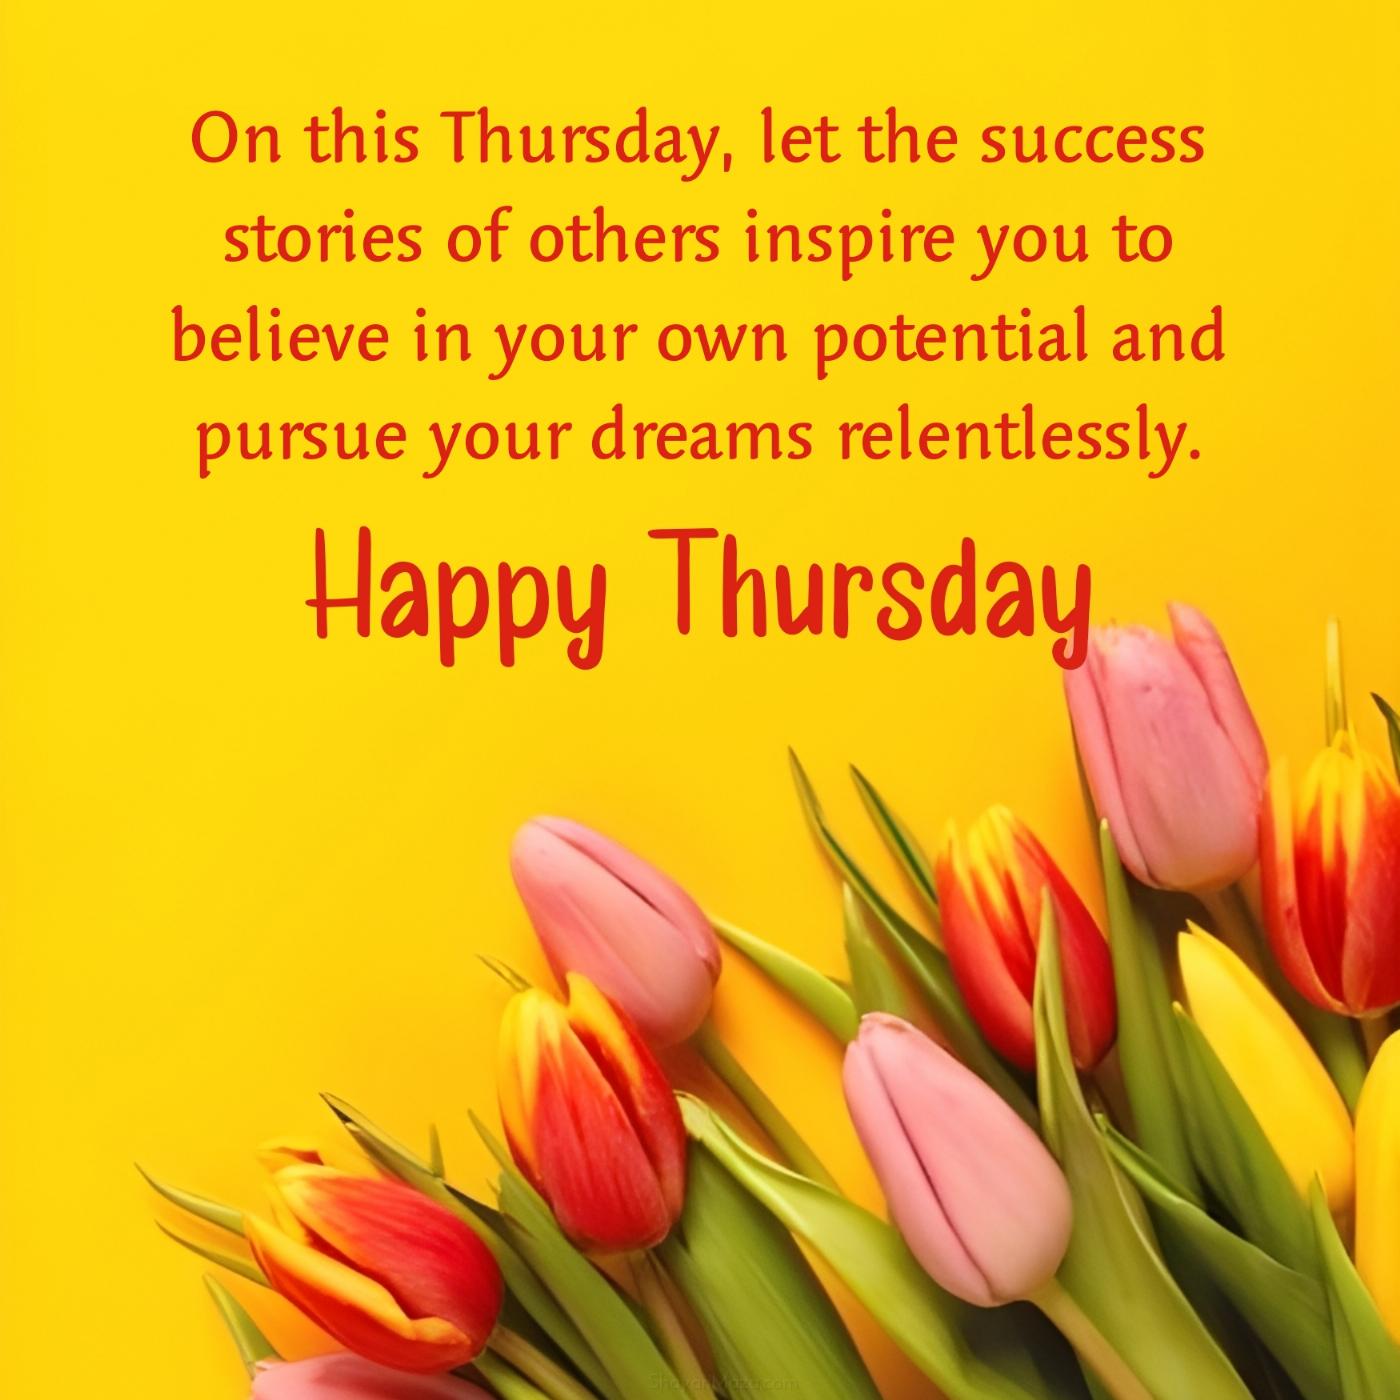 On this Thursday let the success stories of others inspire you